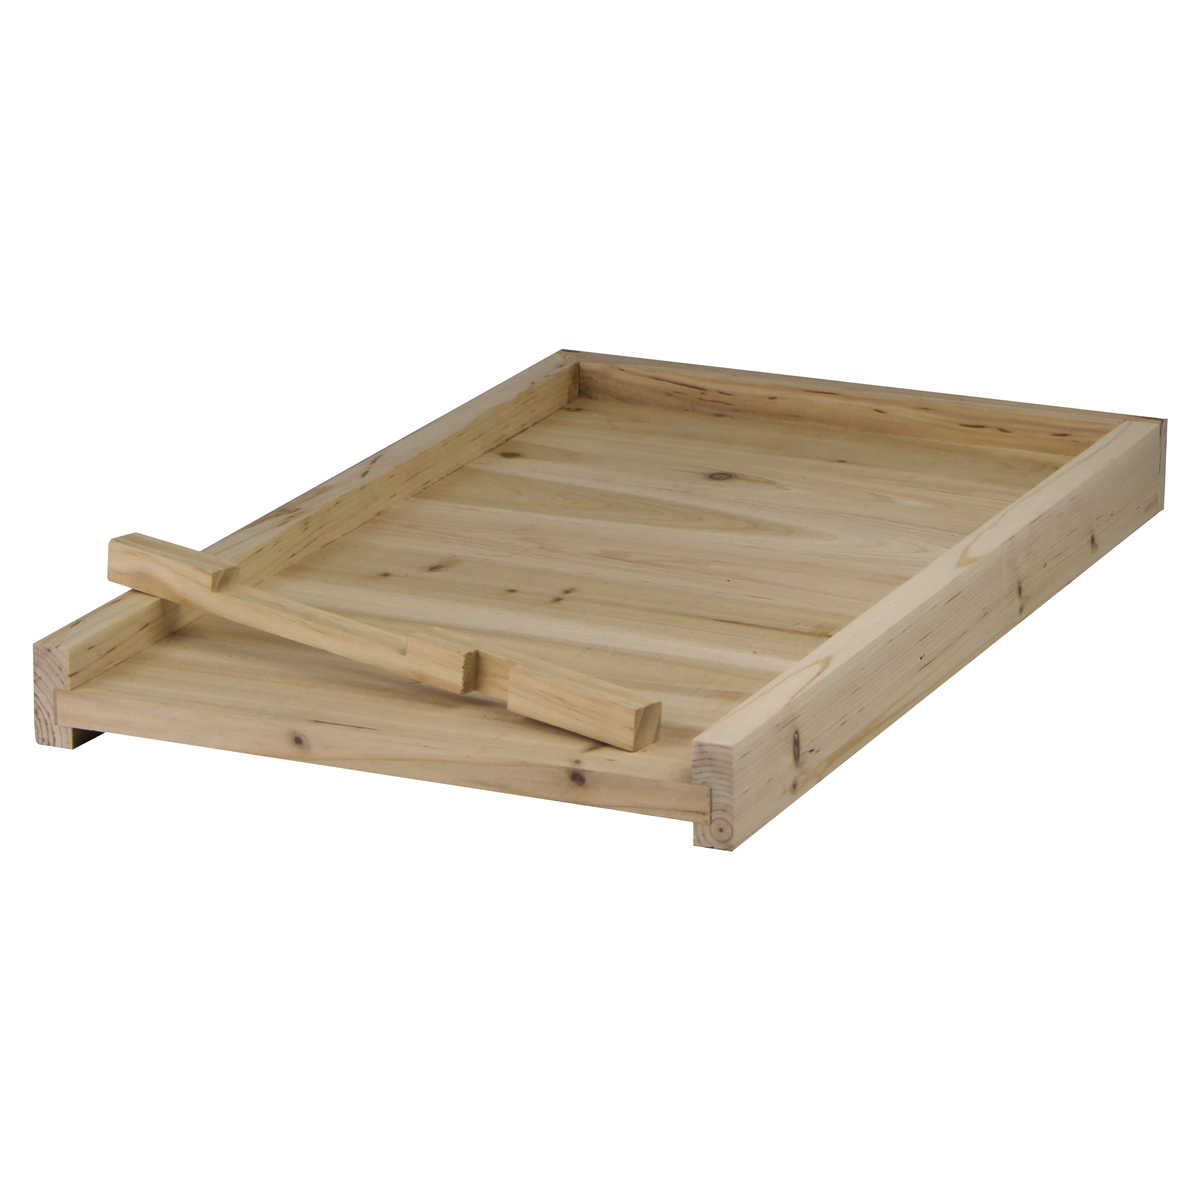 NuBee 8 Frame Solid Bottom Board With Entrance Reducer